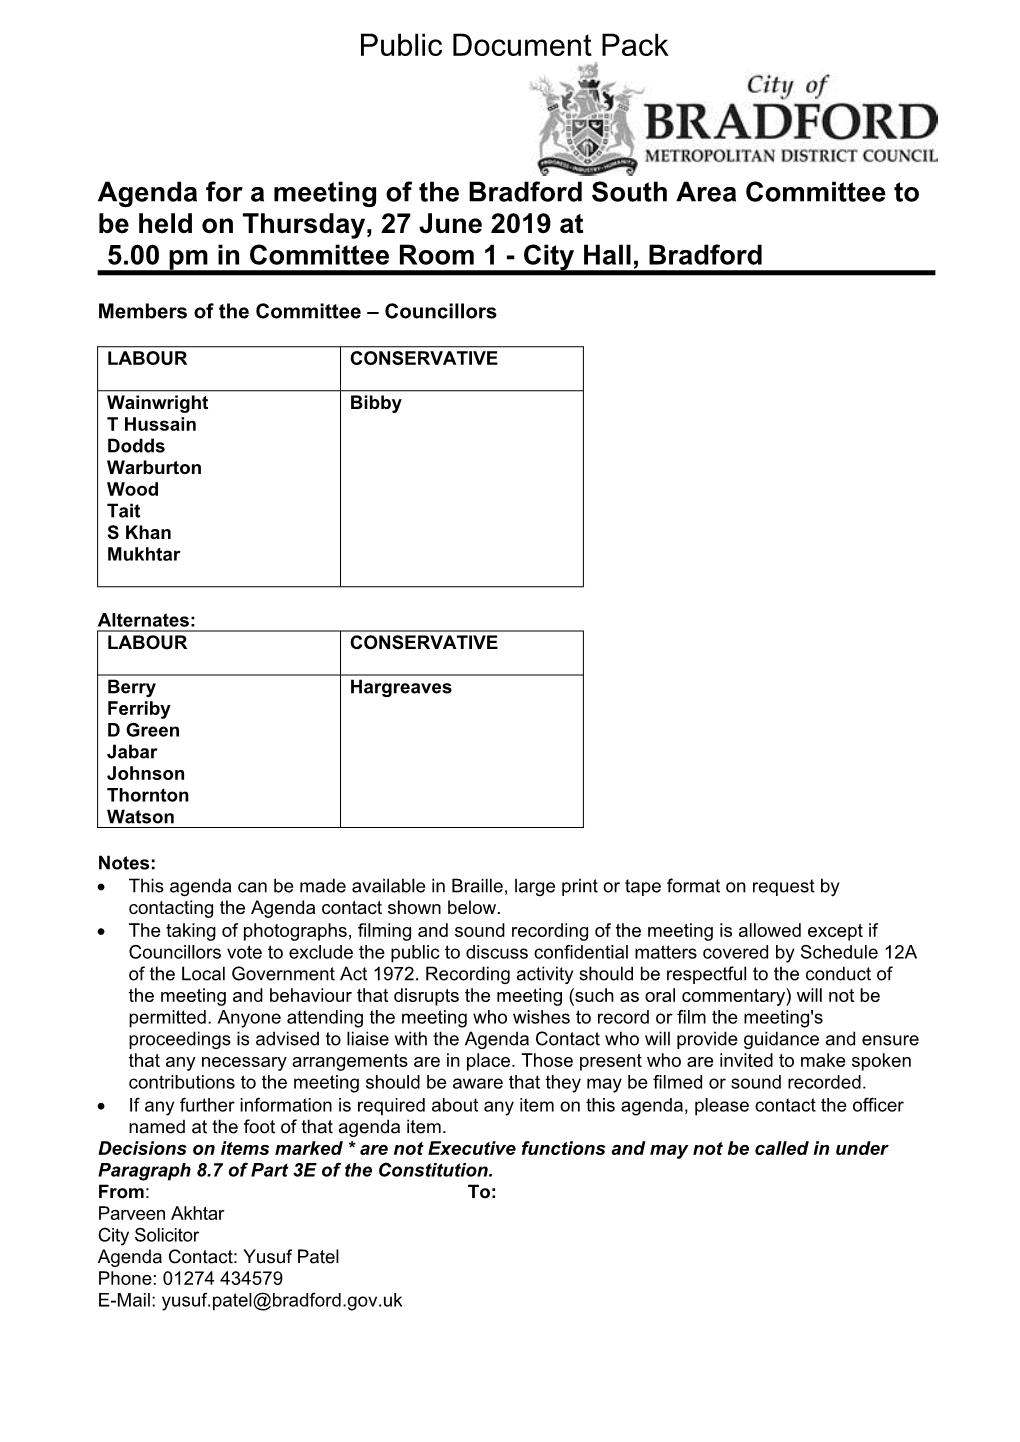 (Public Pack)Agenda Document for Bradford South Area Committee, 27